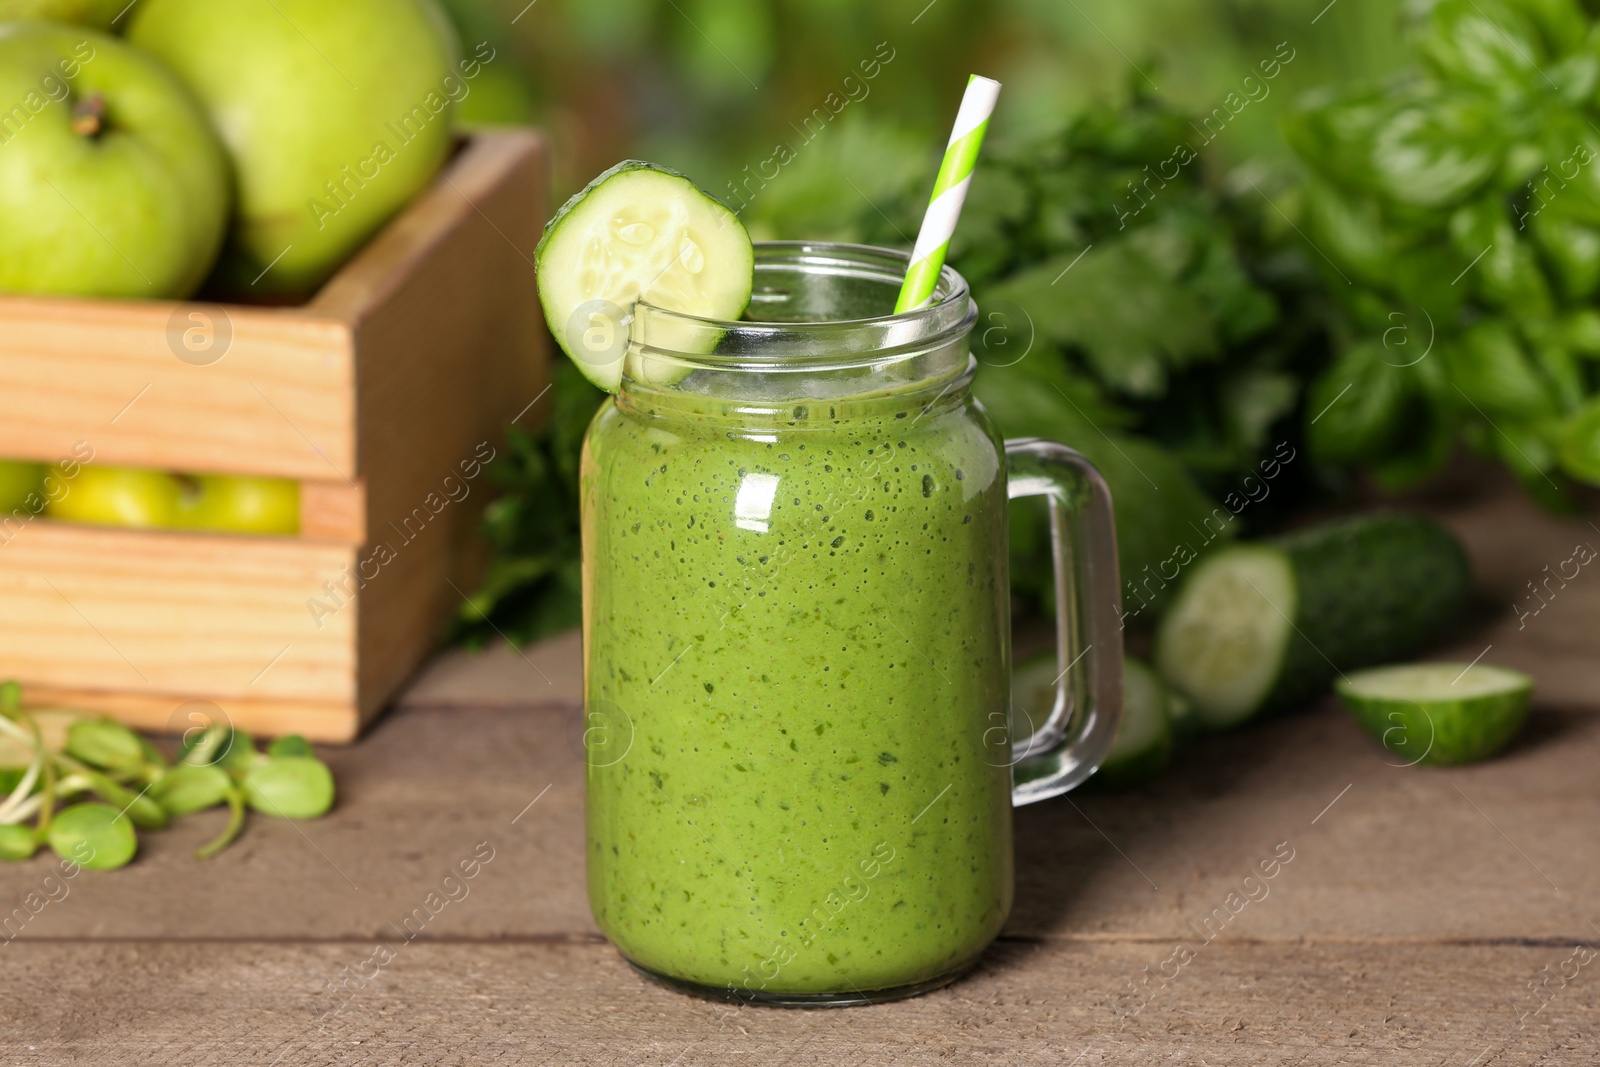 Photo of Mason jar of fresh green smoothie and ingredients on wooden table outdoors